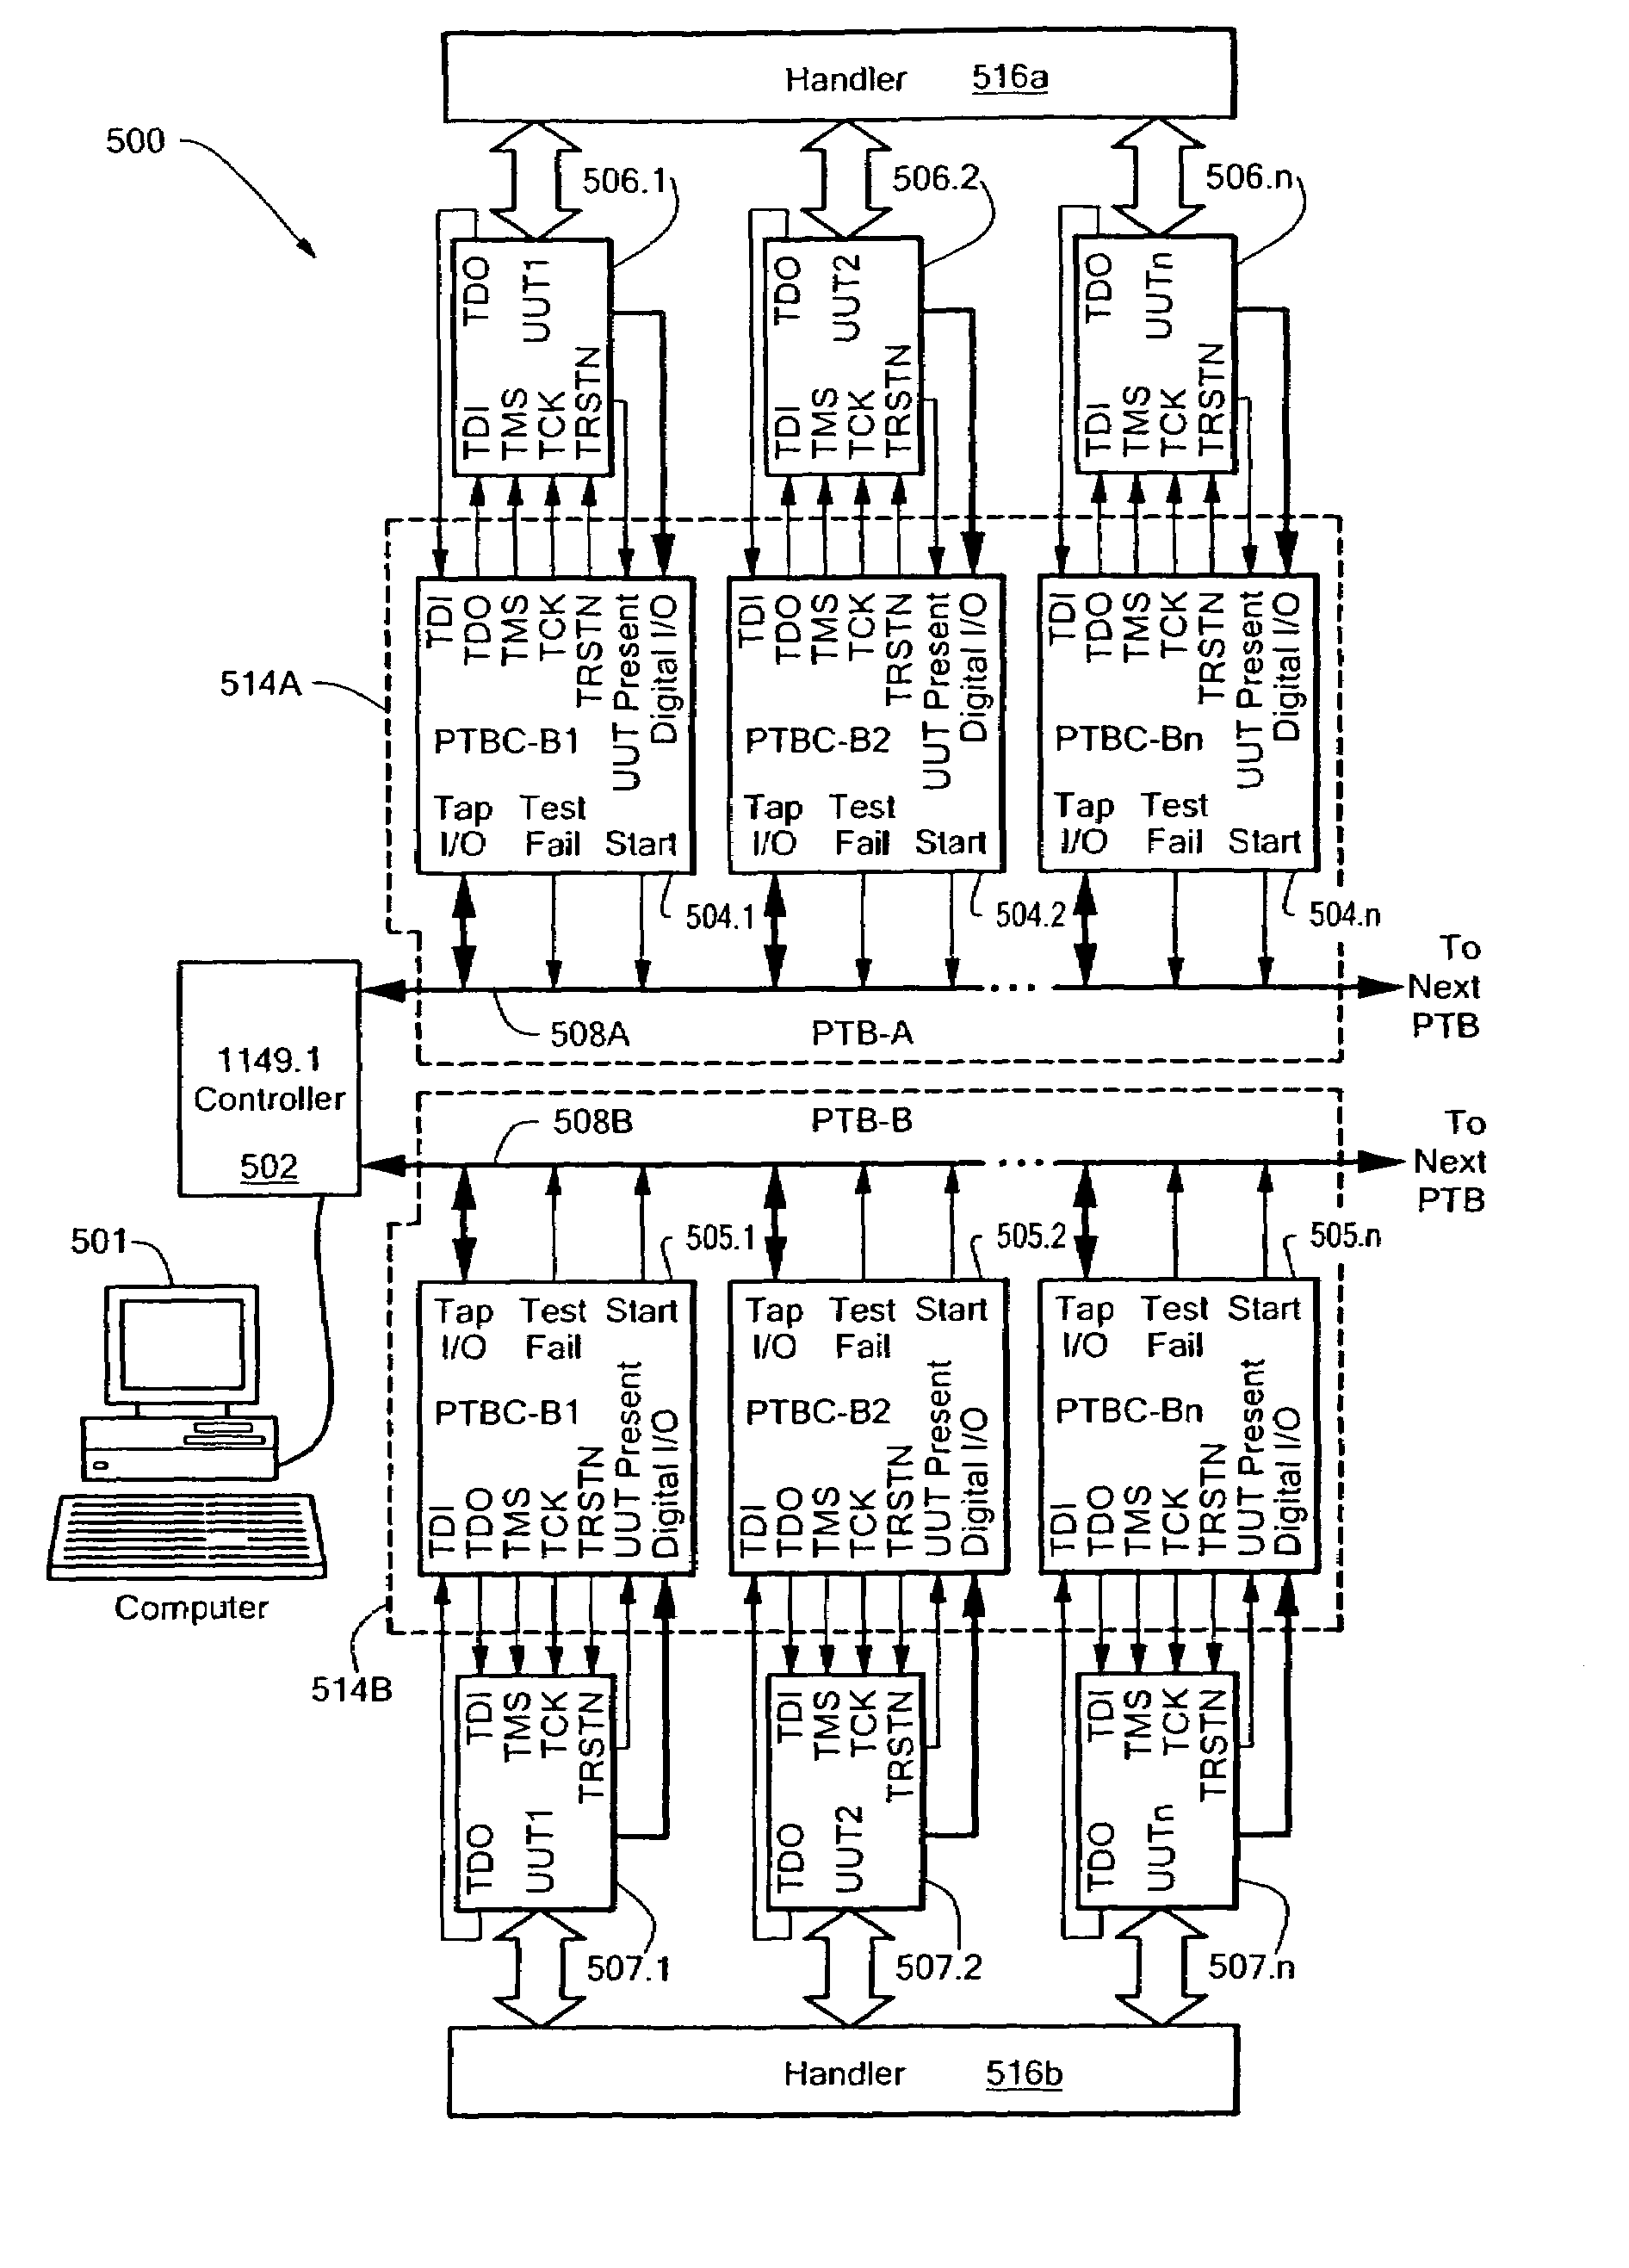 System and method for optimized test and configuration throughput of electronic circuits